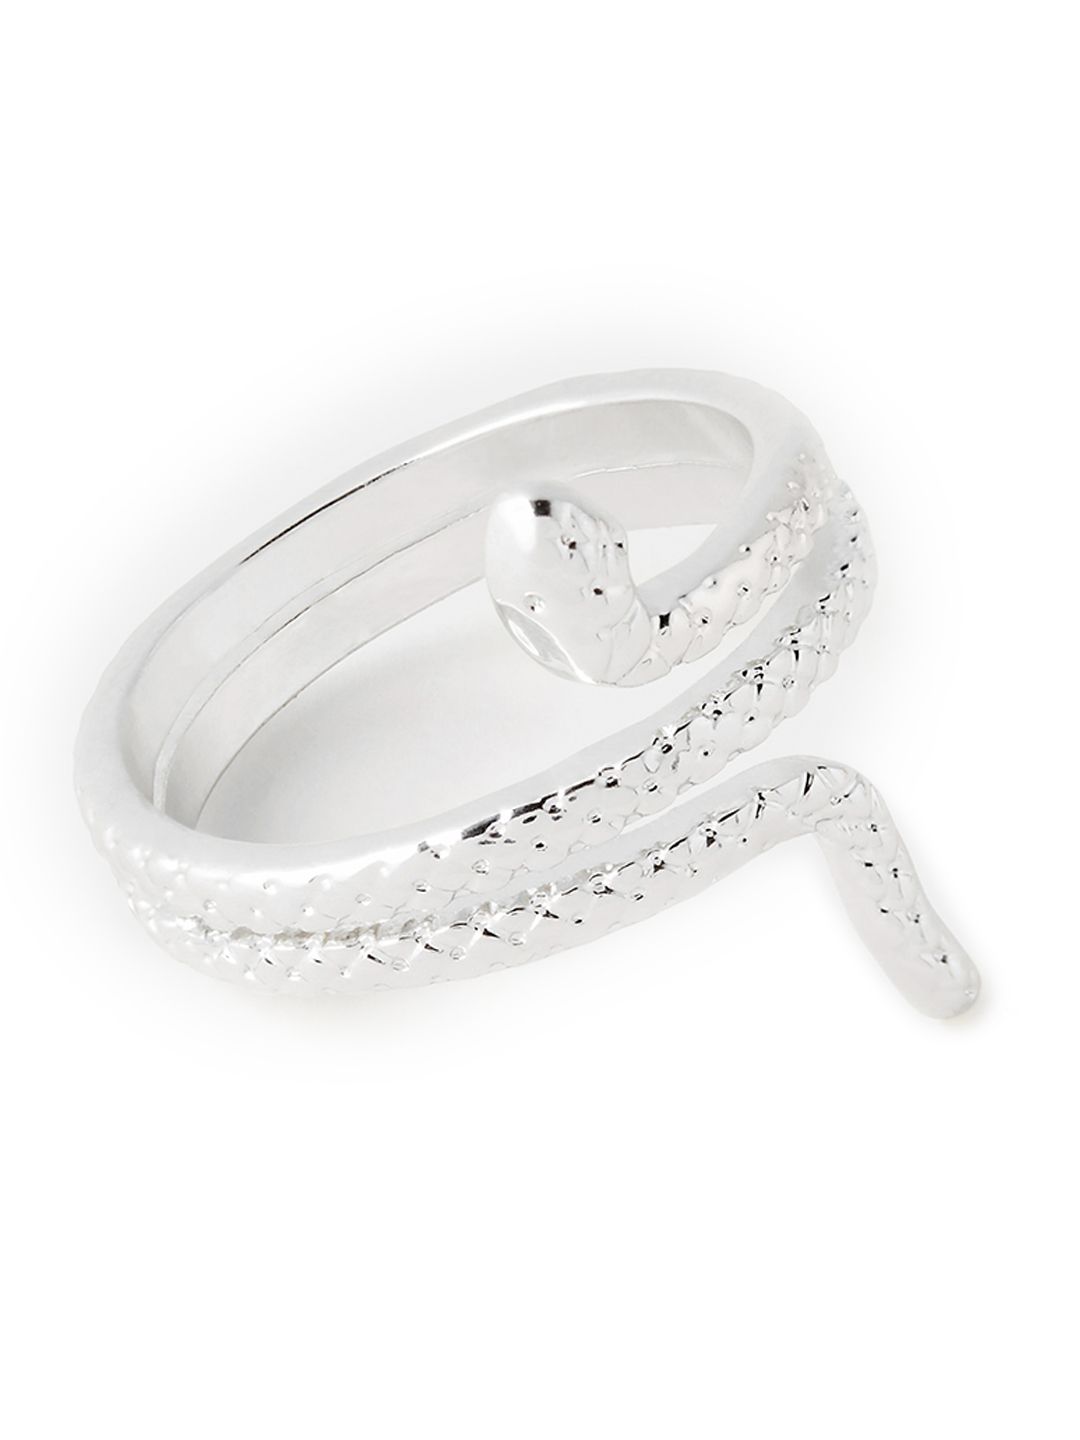 Accessorize Silver-Plated Snake Shaped Adjustable Finger Ring Price in India